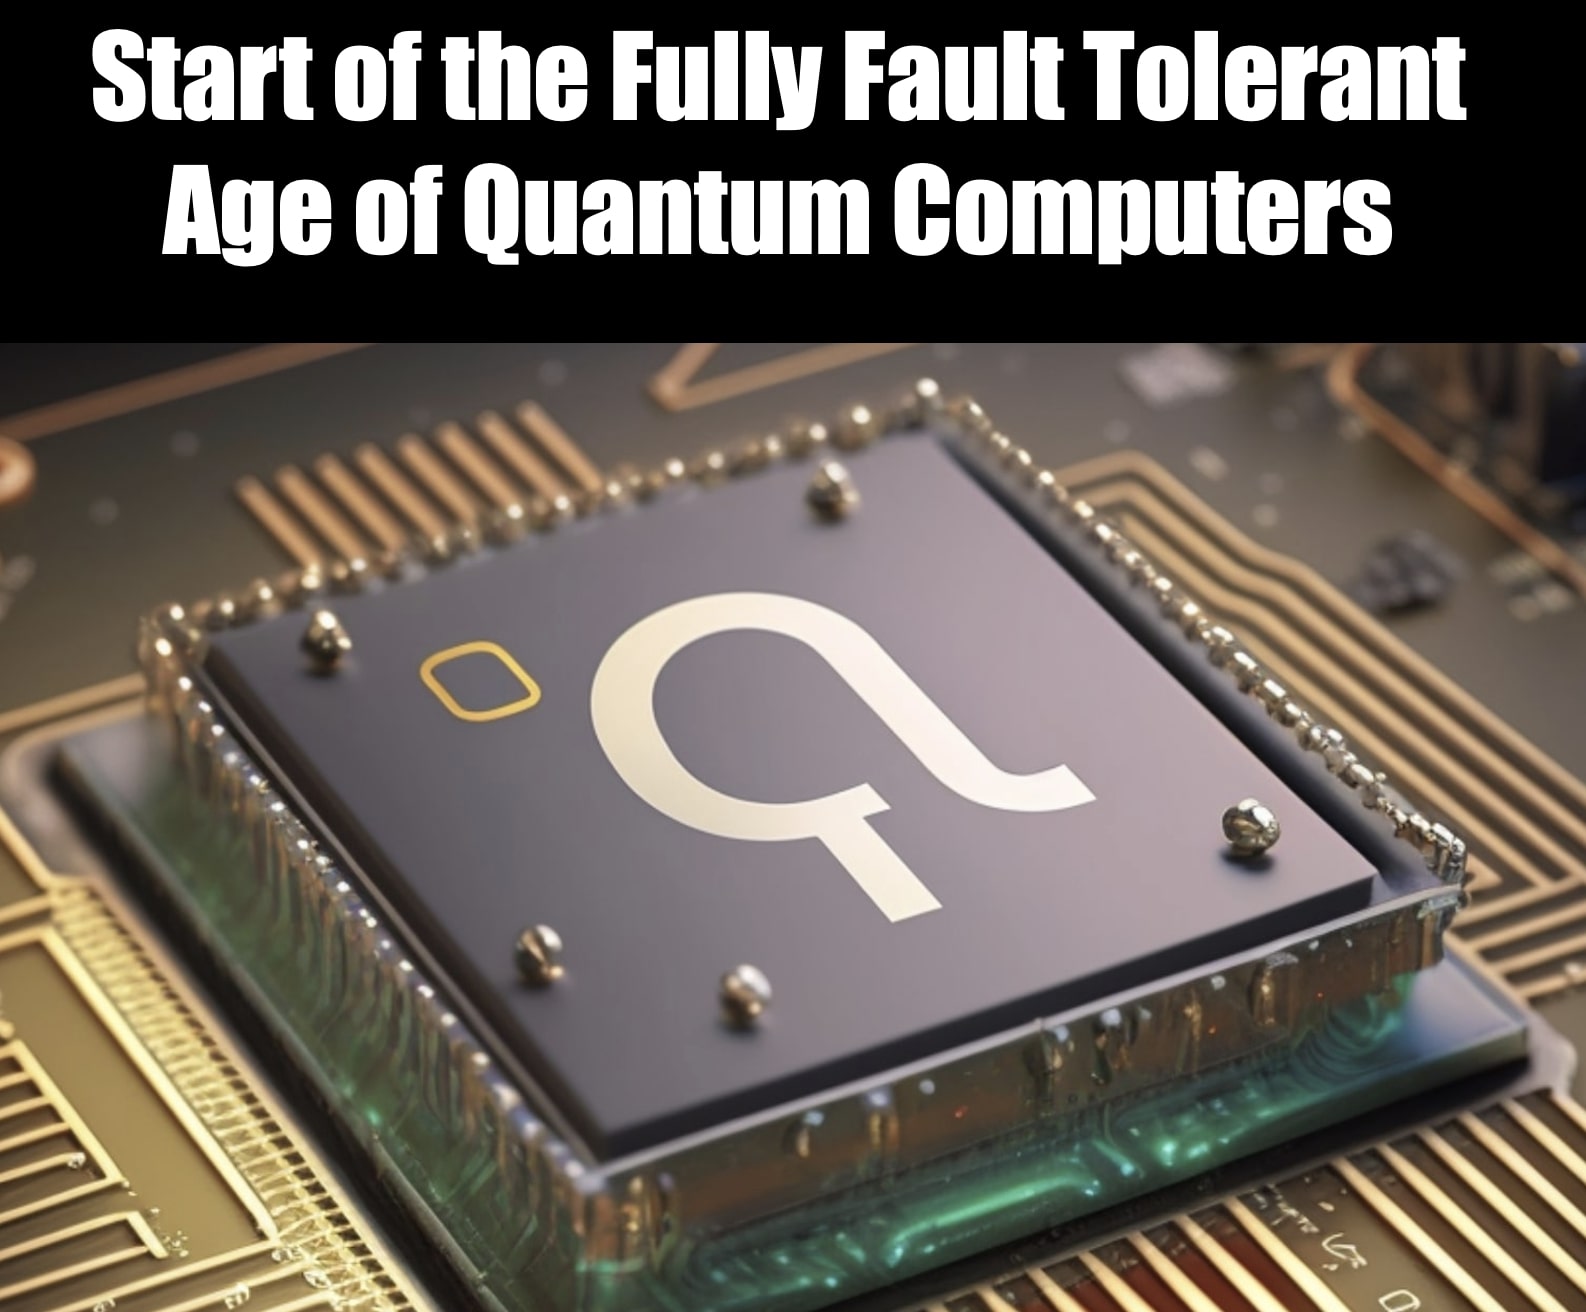 Start of the Fully Fault Tolerant Age of Quantum Computers